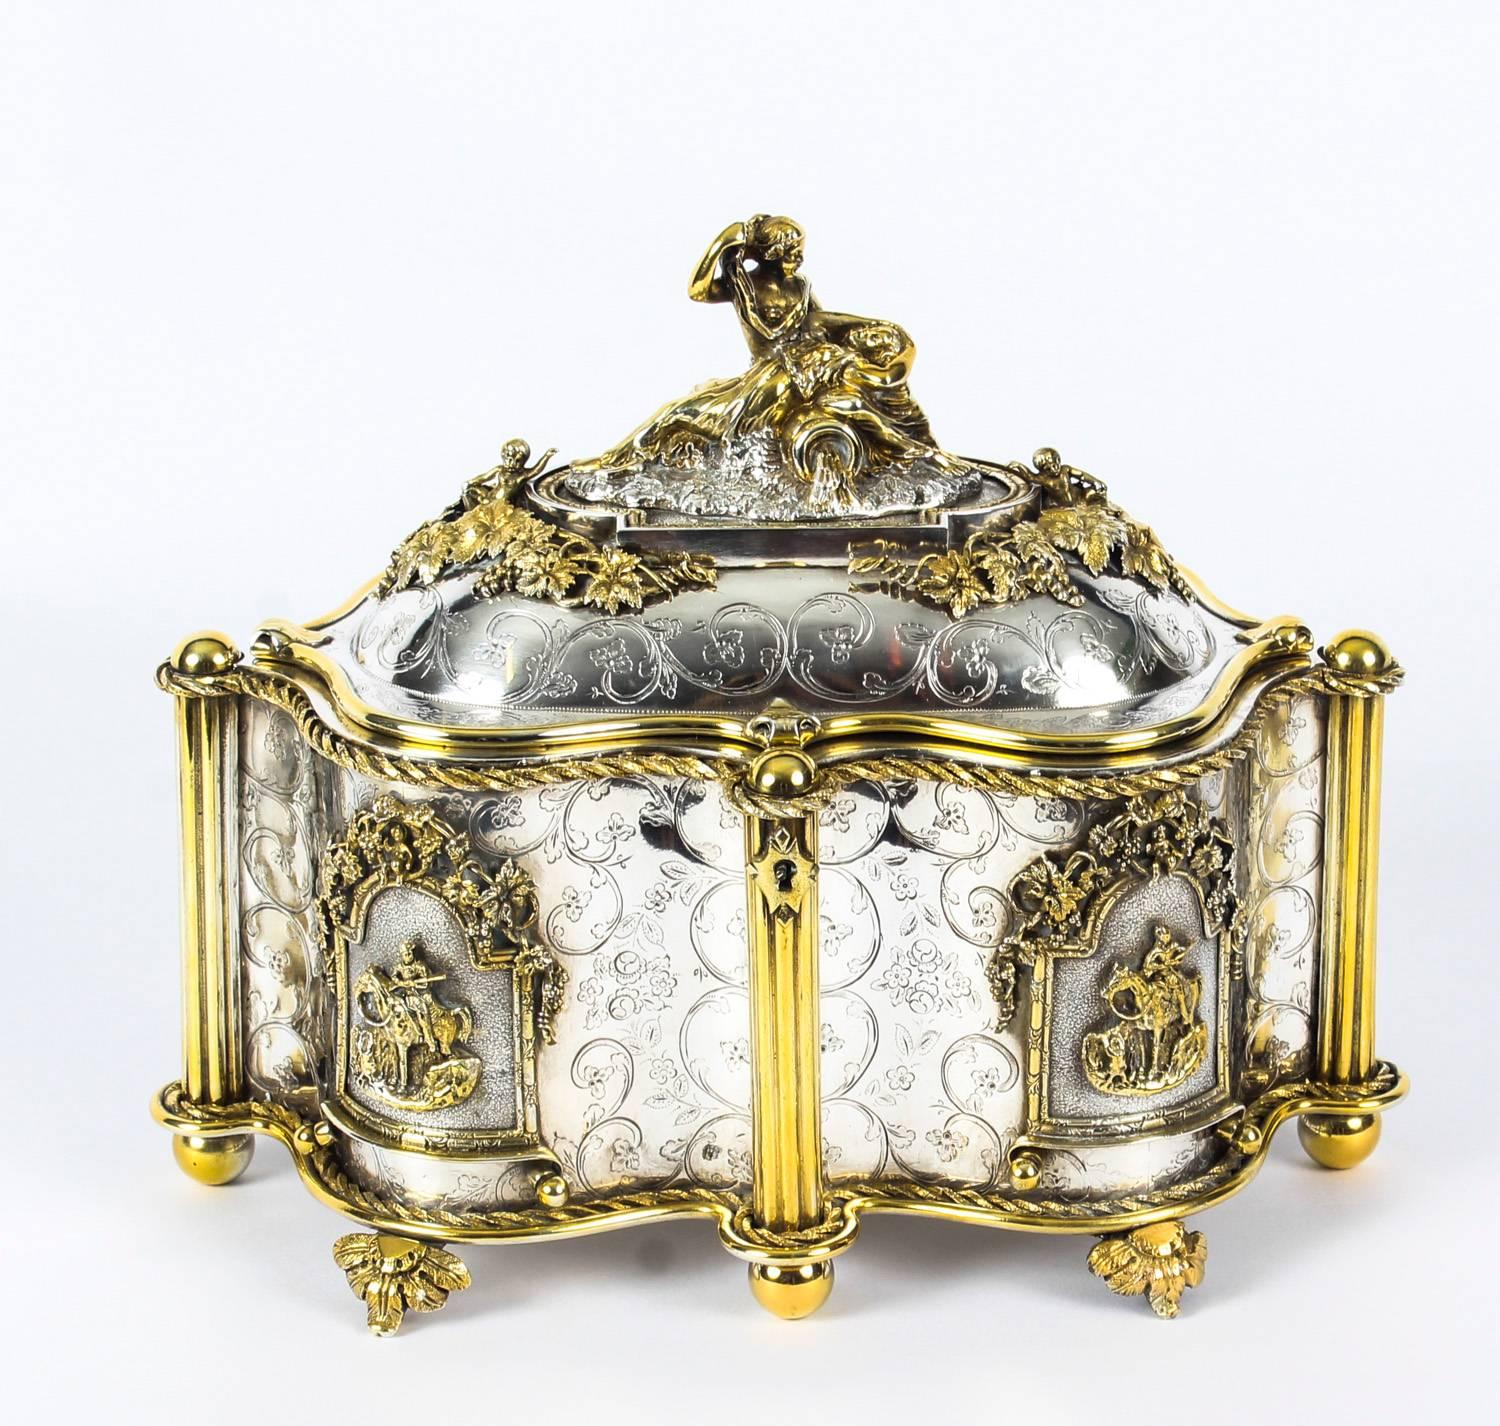 A beautiful French gilt and silver plated bronze jewellery casket, circa 1870 in date.
 
The shaped-oval casket features superb engraved decoration and beautifully reeded pillar supports with cast and applied equestrian panels to the engraved